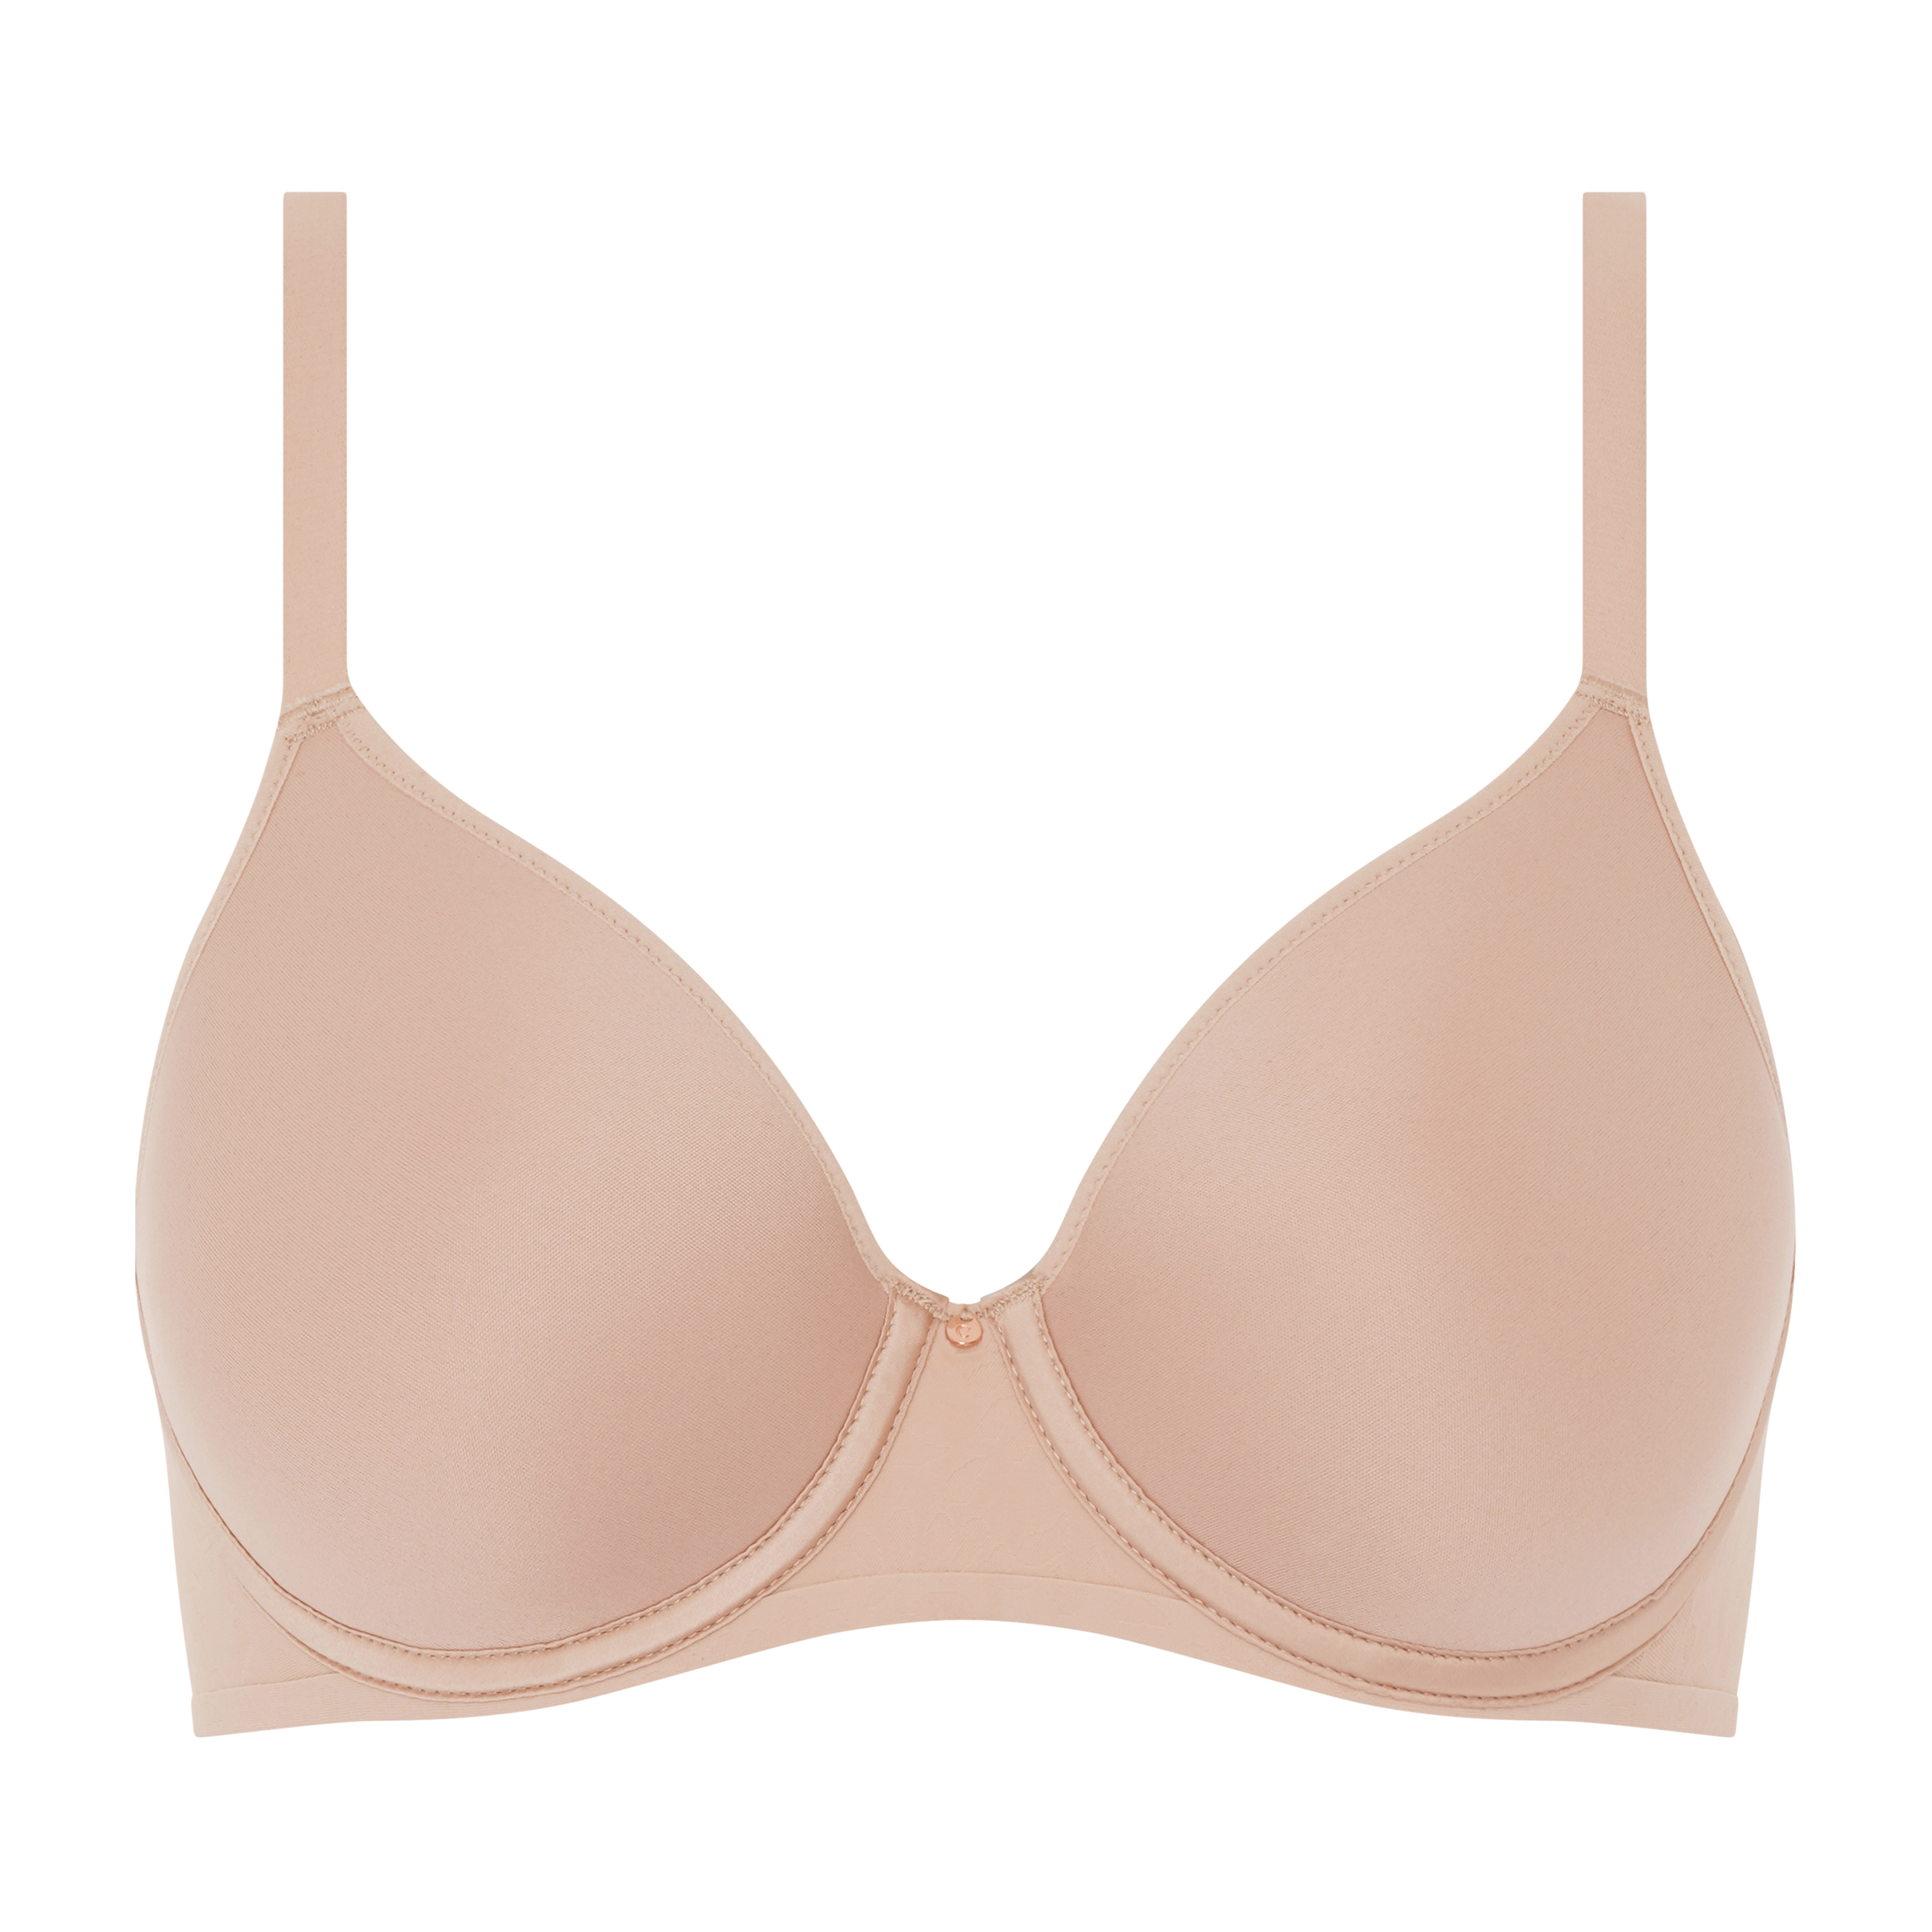 Chantelle NUDE ROSE Comfort Chic Side Smoothing Underwire Bra, US